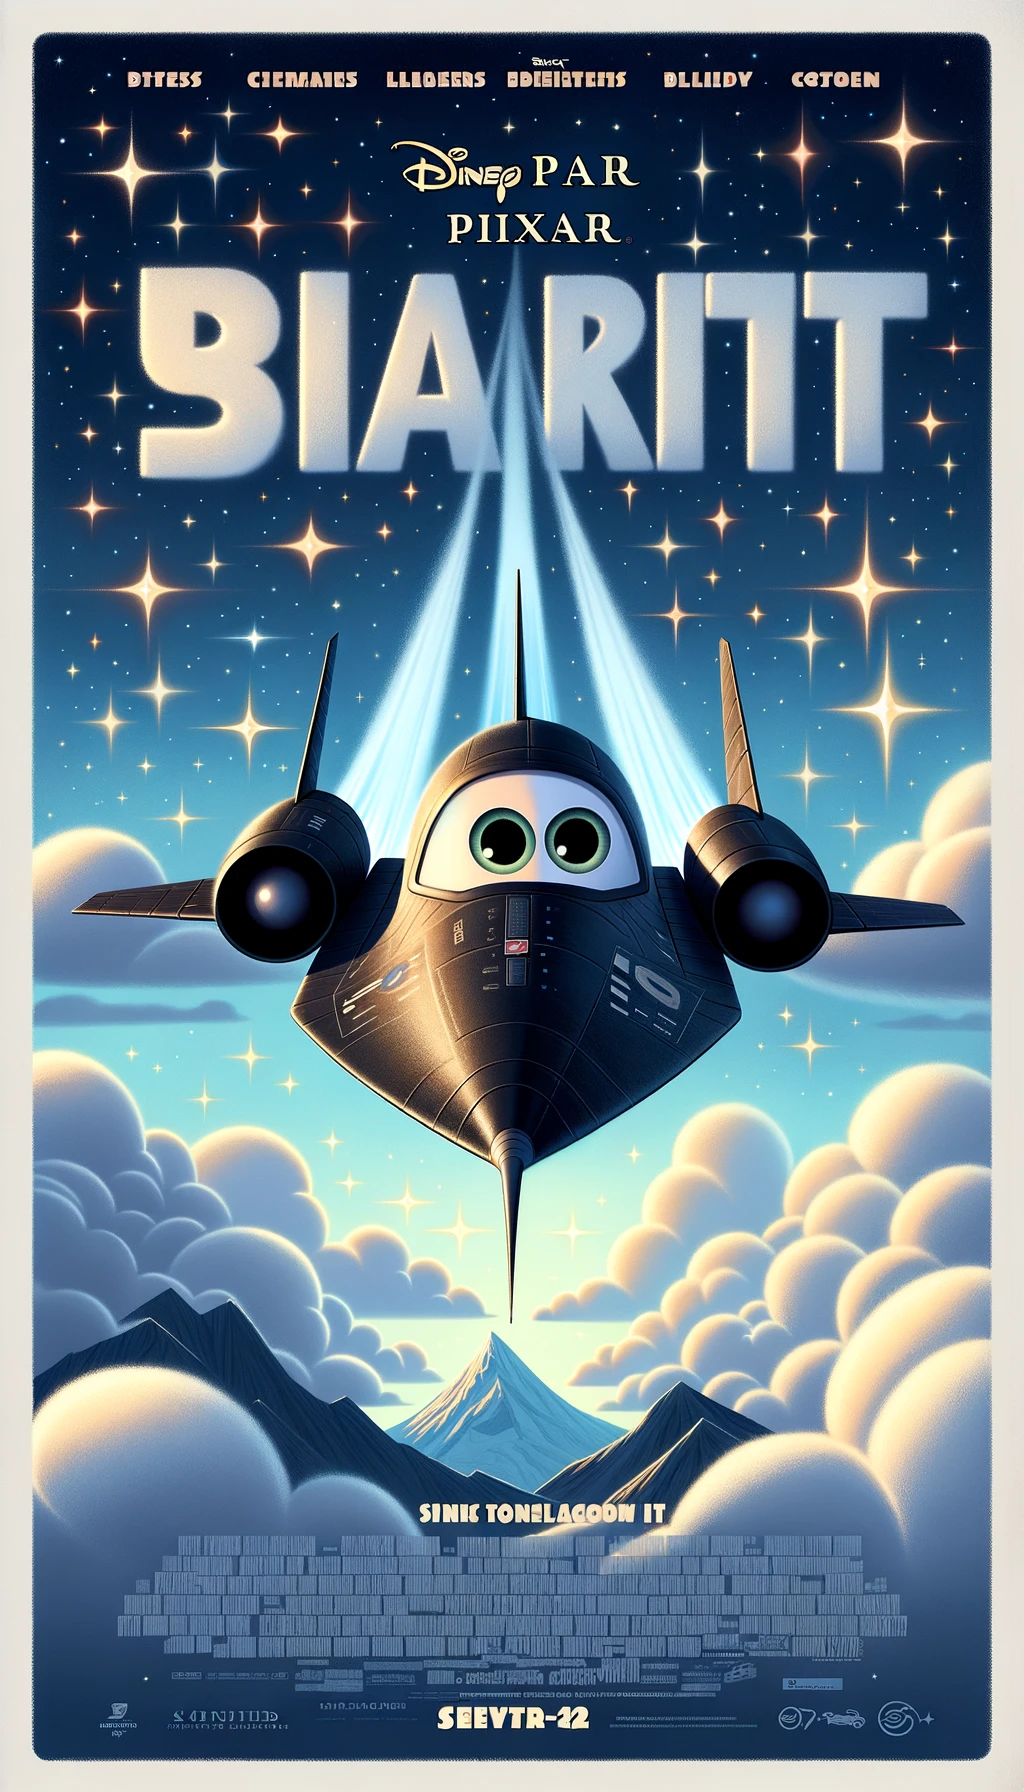 A Pixar movie poster showcasing the Lockheed SR-71 Blackbird as the central character, rendered charming 3D animation style. The Blackbird has a sleek, anthropomorphic design with eyes on the cockpit, giving it a heroic personality. It soars through a sky filled with fluffy clouds, leaving a trail of shimmering stars behind, symbolizing speed and adventure. The poster includes a whimsical title in bold, adventurous font and a silhouette of a mountain range below.